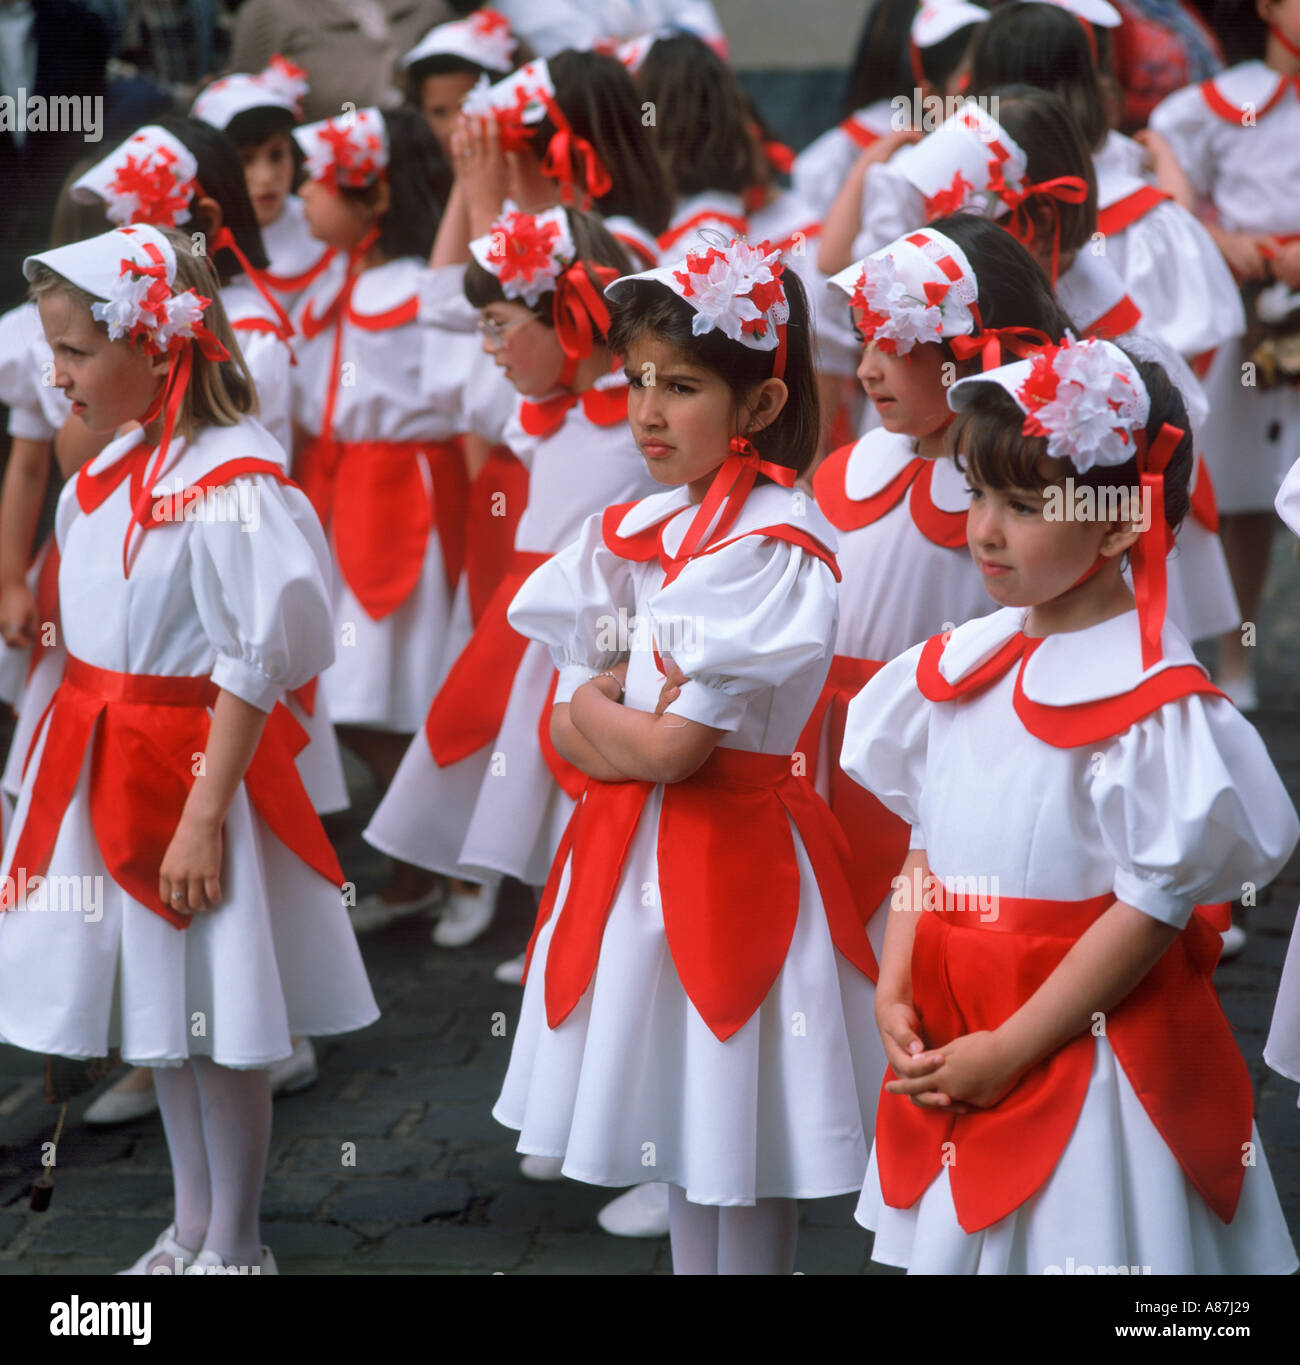 Line of young girls in costume for the children's parade, Madeira Flower Festival, Funchal, Madeira, Portugal Stock Photo